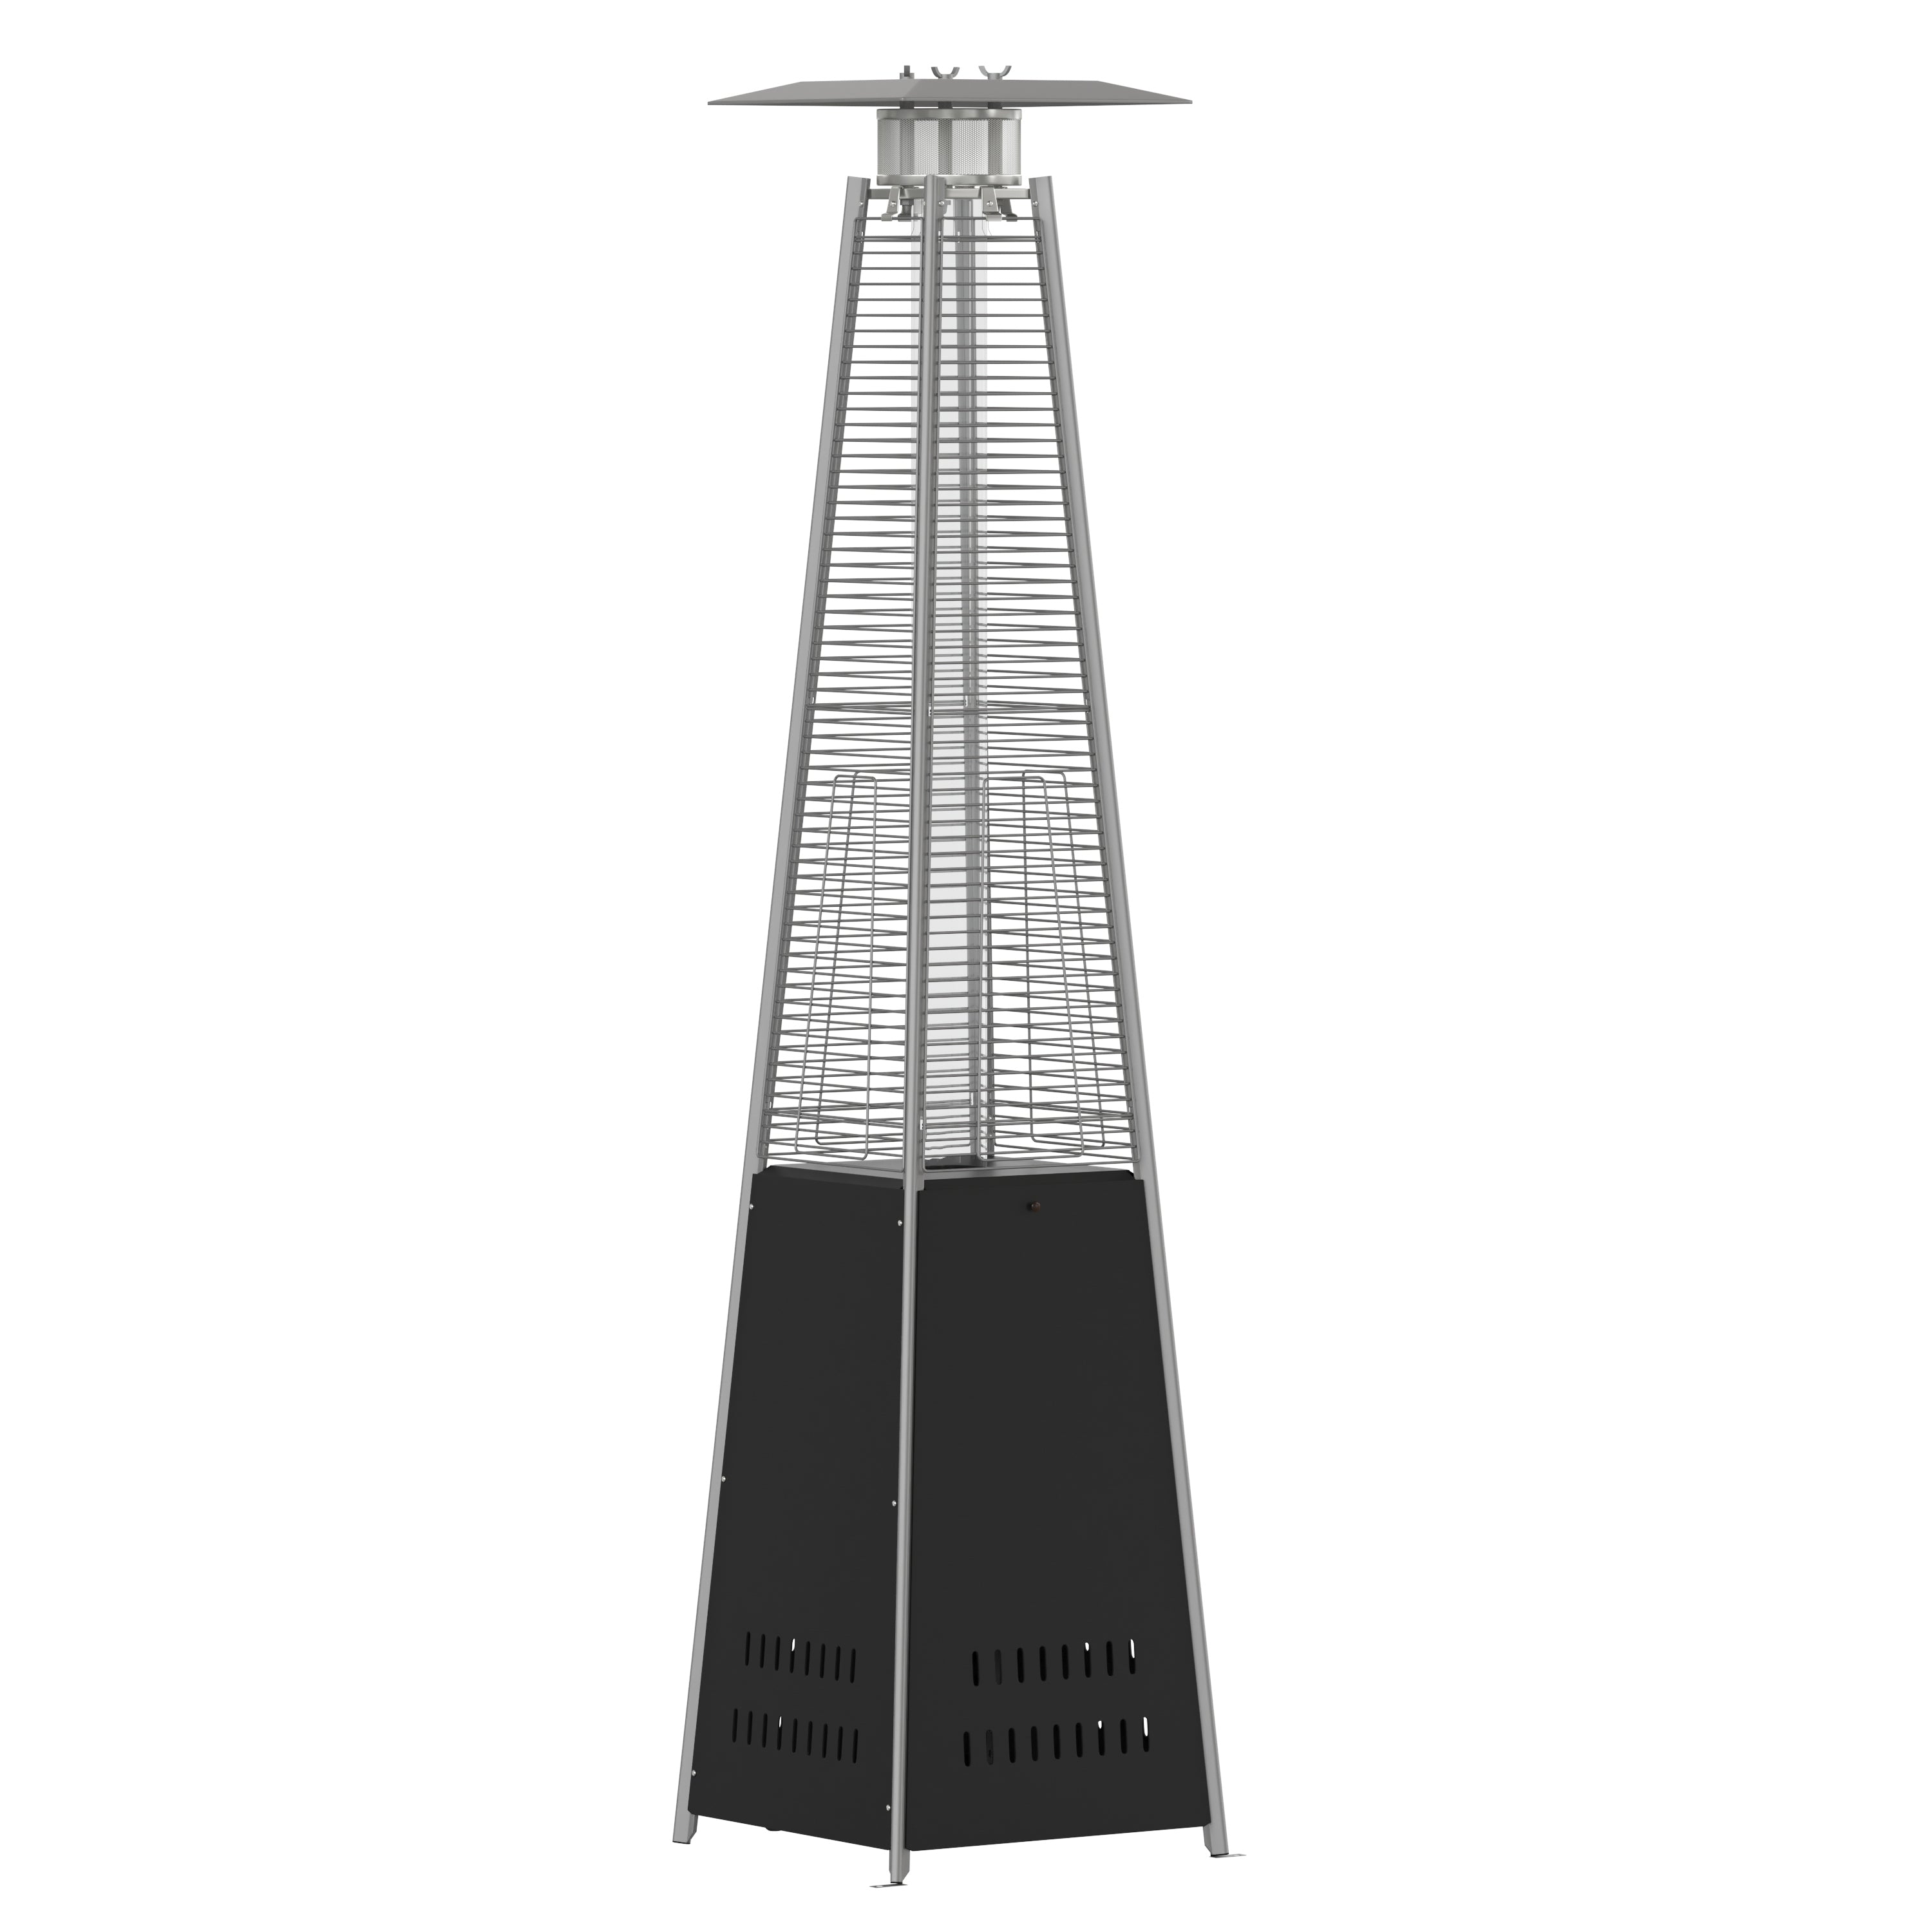 Sol Patio Outdoor Heating-Stainless Steel Pyramid 42,000 BTU Propane Heater with Wheels for Commercial & Residential Use-Portable Patio Heaters-Flash Furniture-Wall2Wall Furnishings